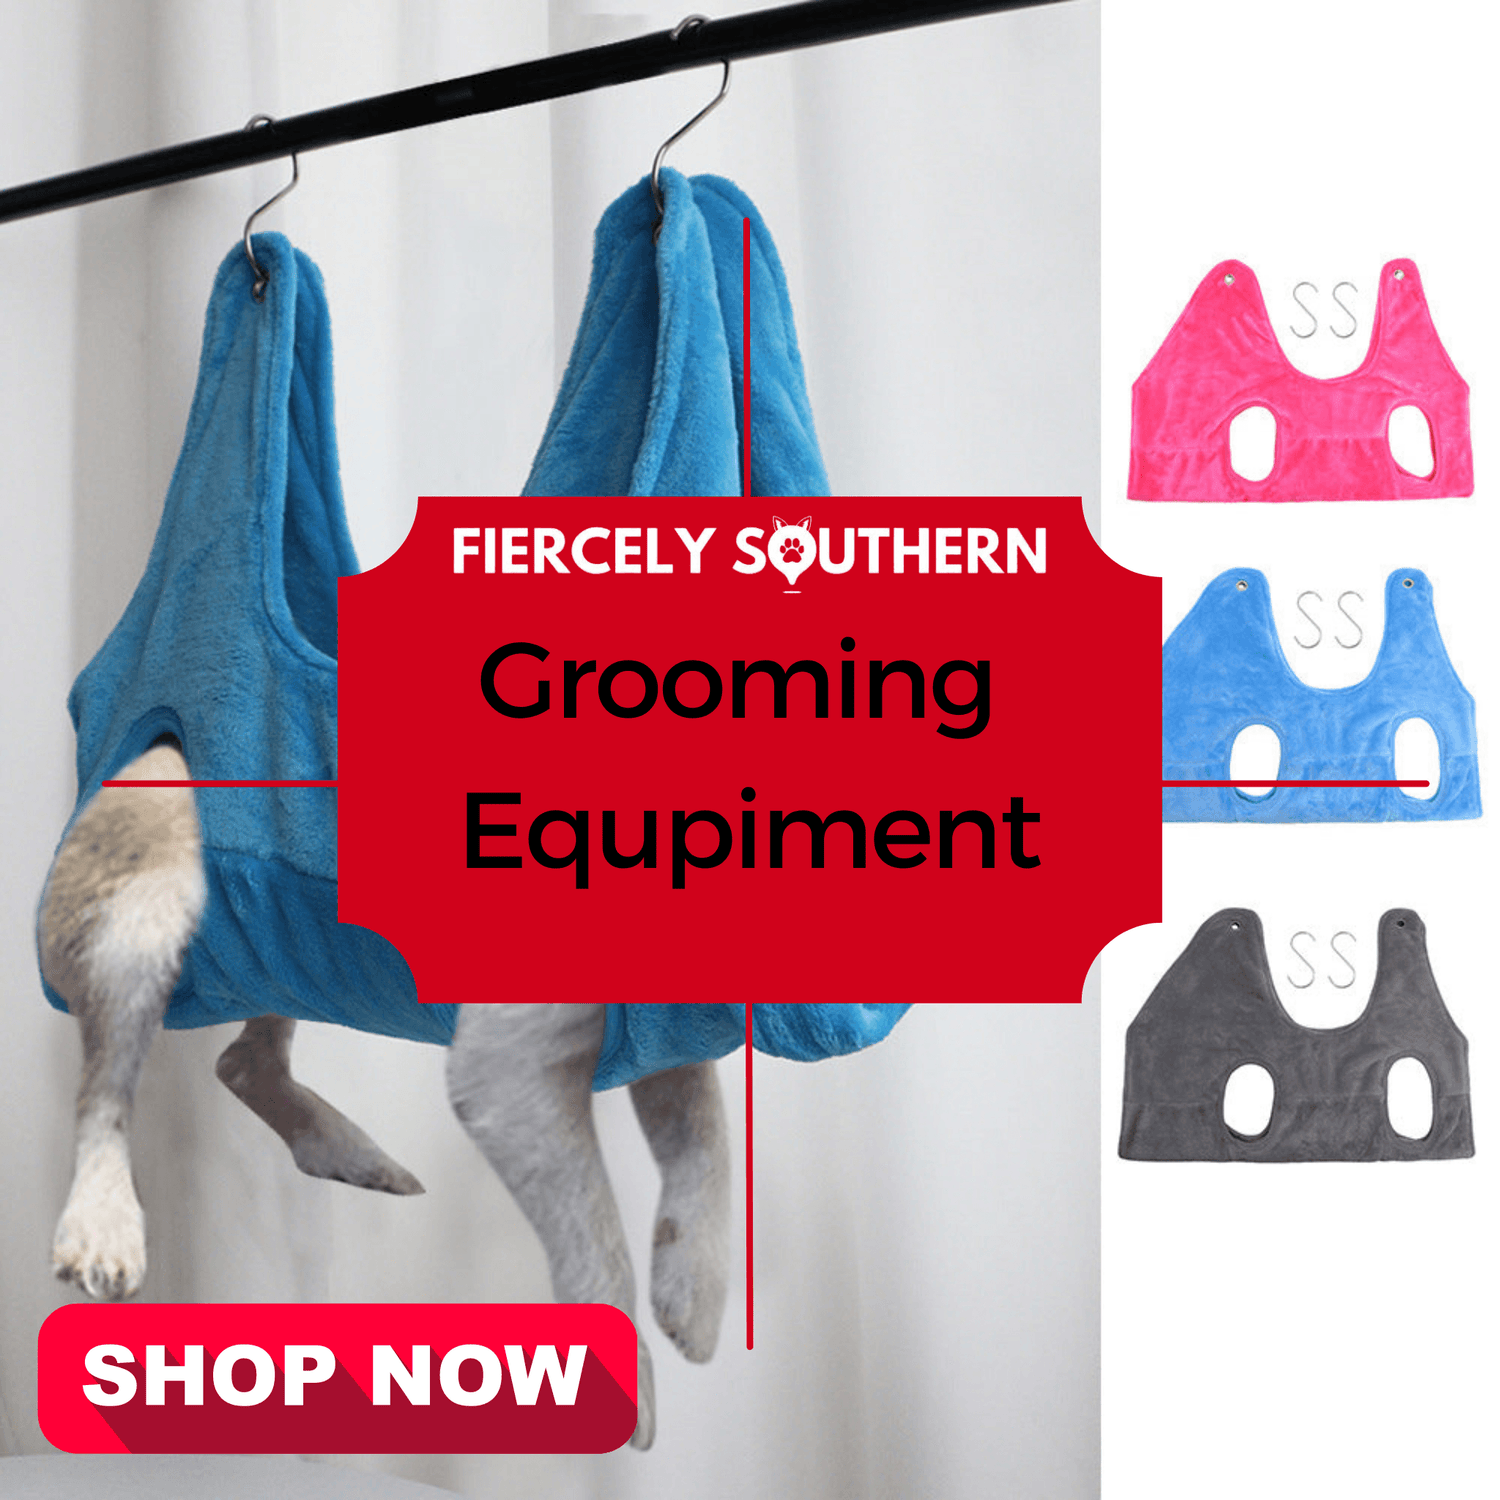 Grooming Equipment - Fiercely Southern